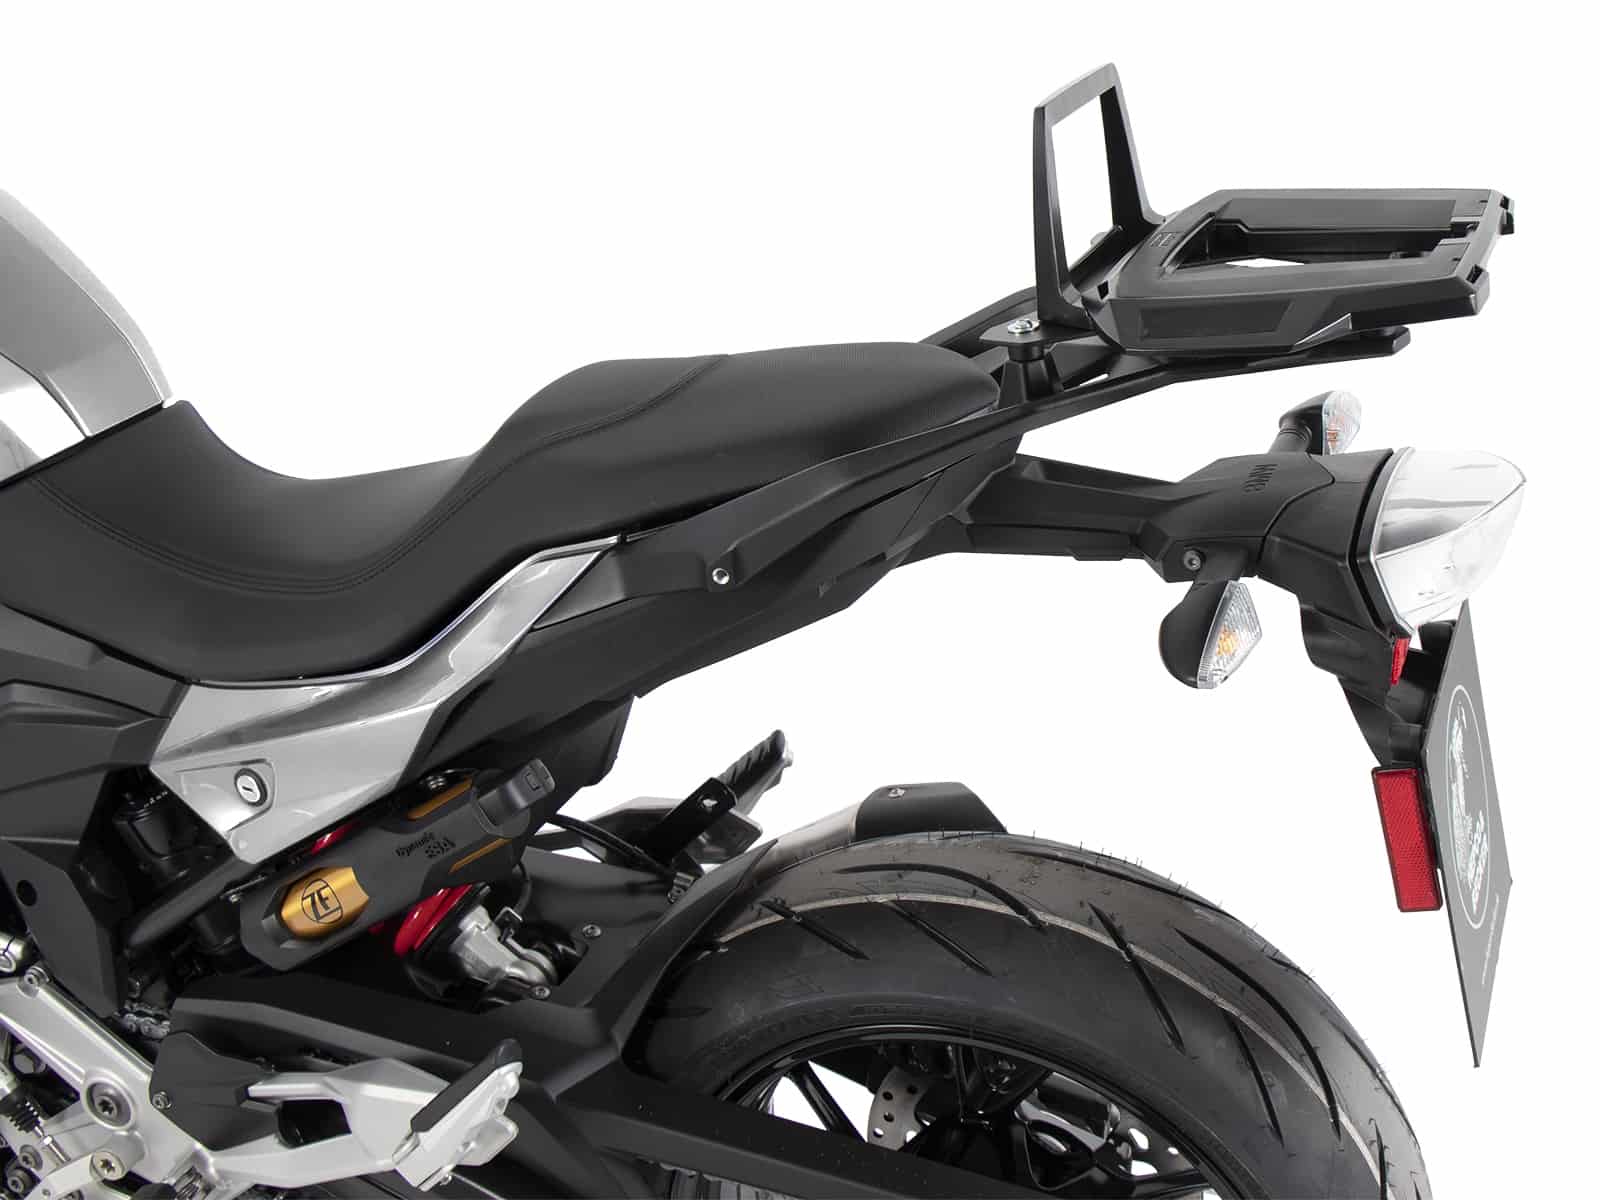 Alurack top case carrier black for combination with original rear rack for BMW F 900 XR (2020-)